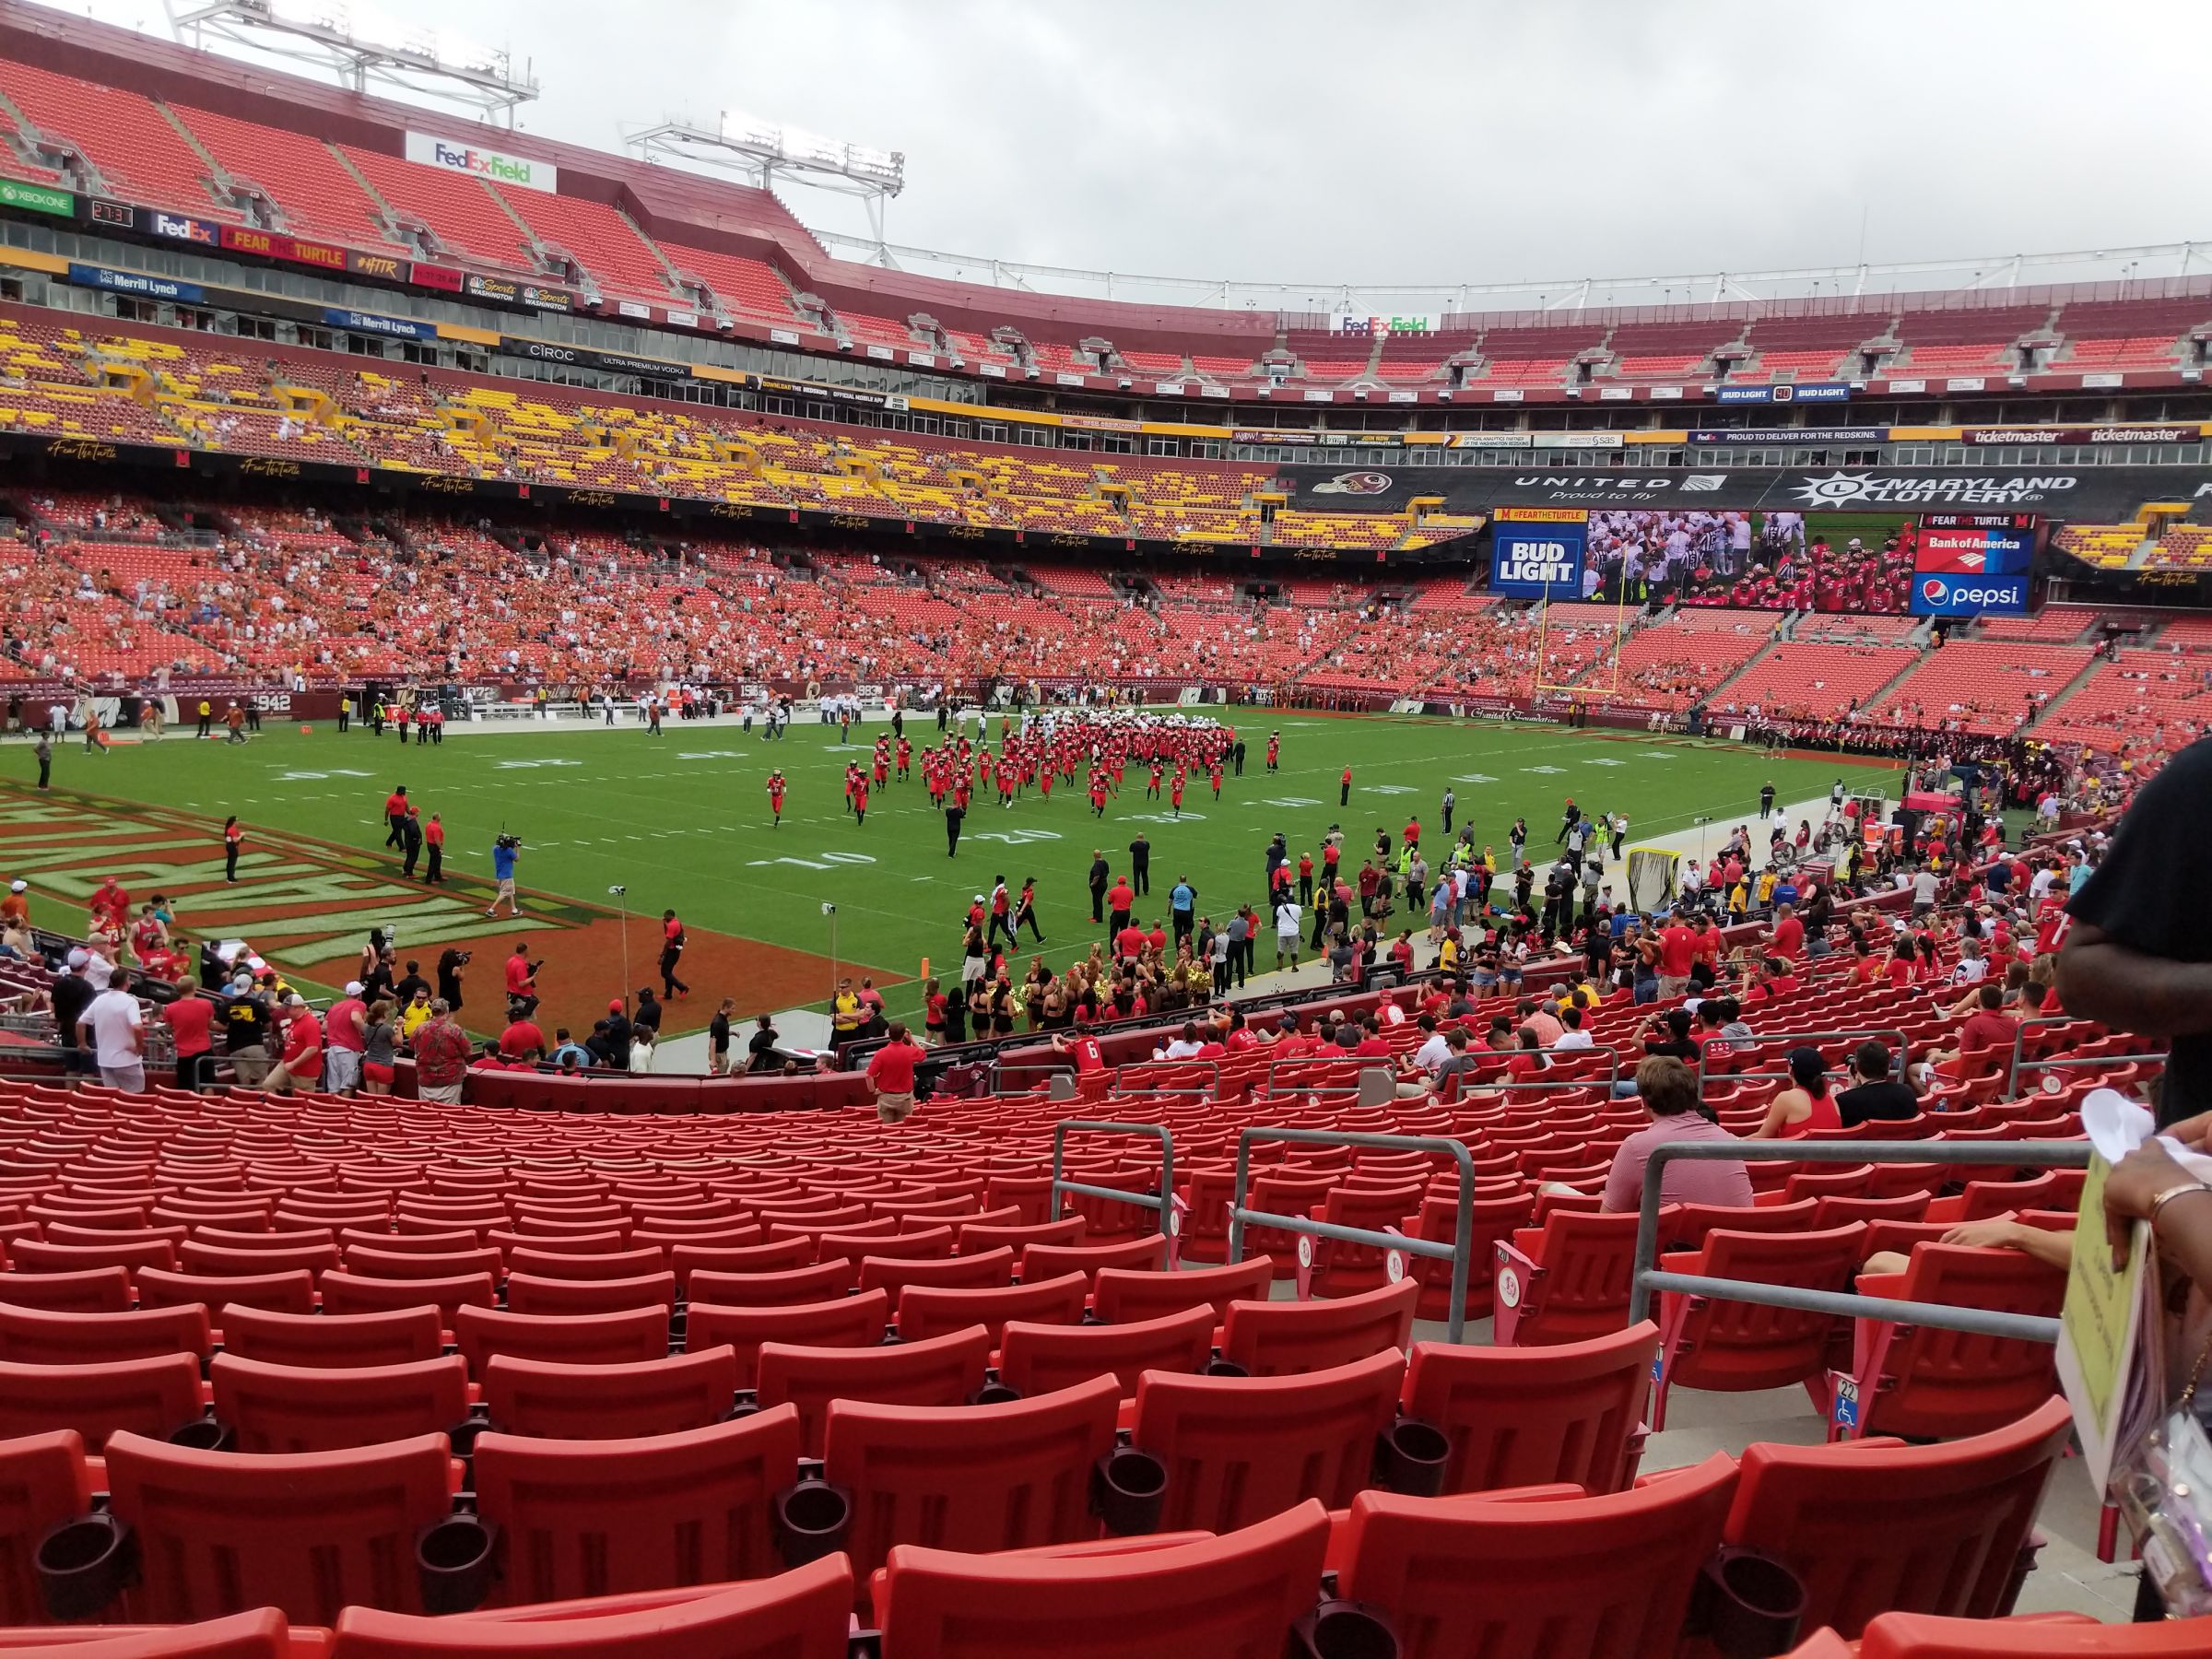 section 107, row 27 seat view  - fedexfield